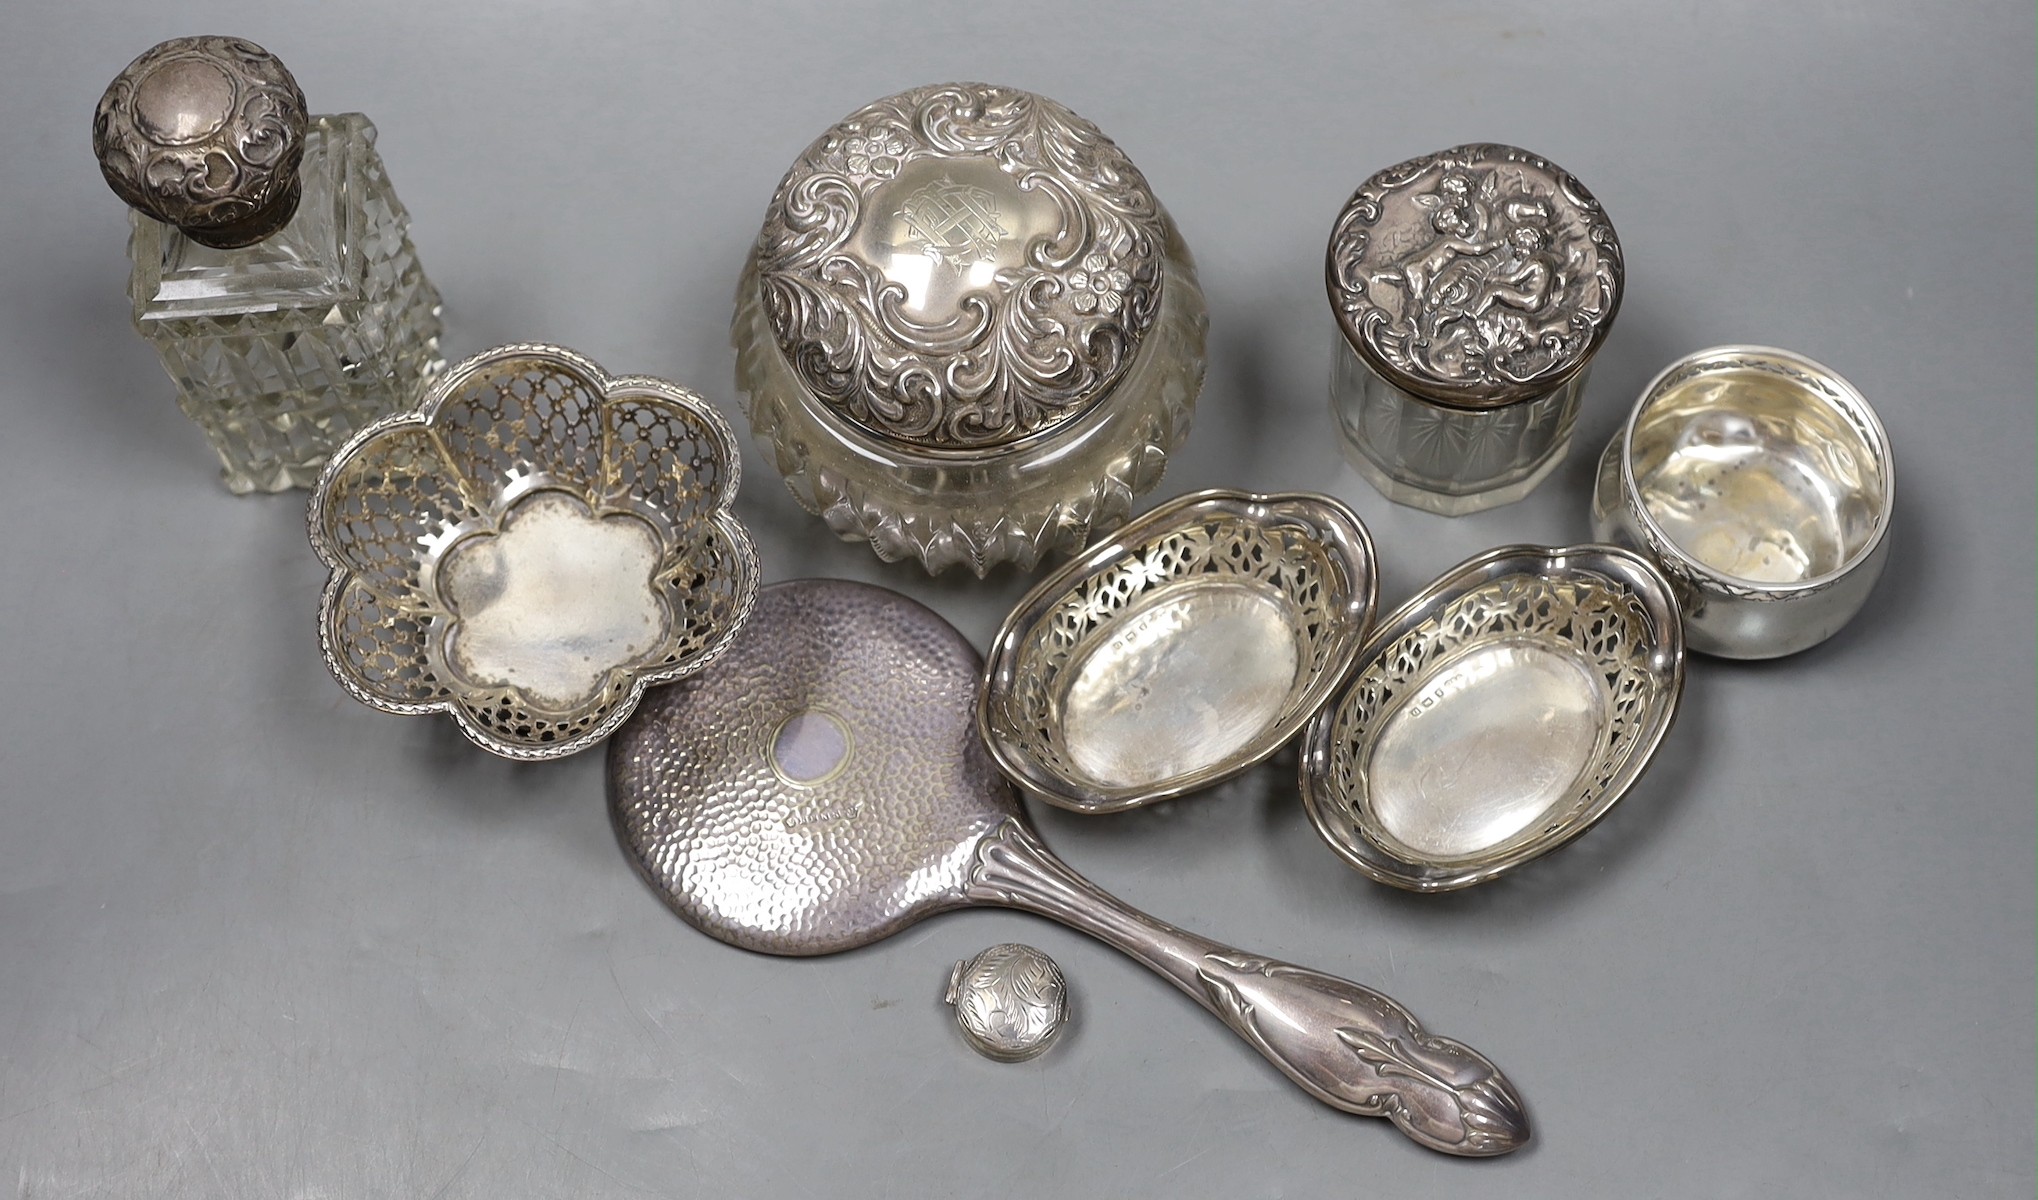 A small pair of George V pierced silver bonbon dishes, 92mm, two small pierced silver bowls, a modern silver pill box, three silver mounted glass toilet jars and a silver plated hand mirror.